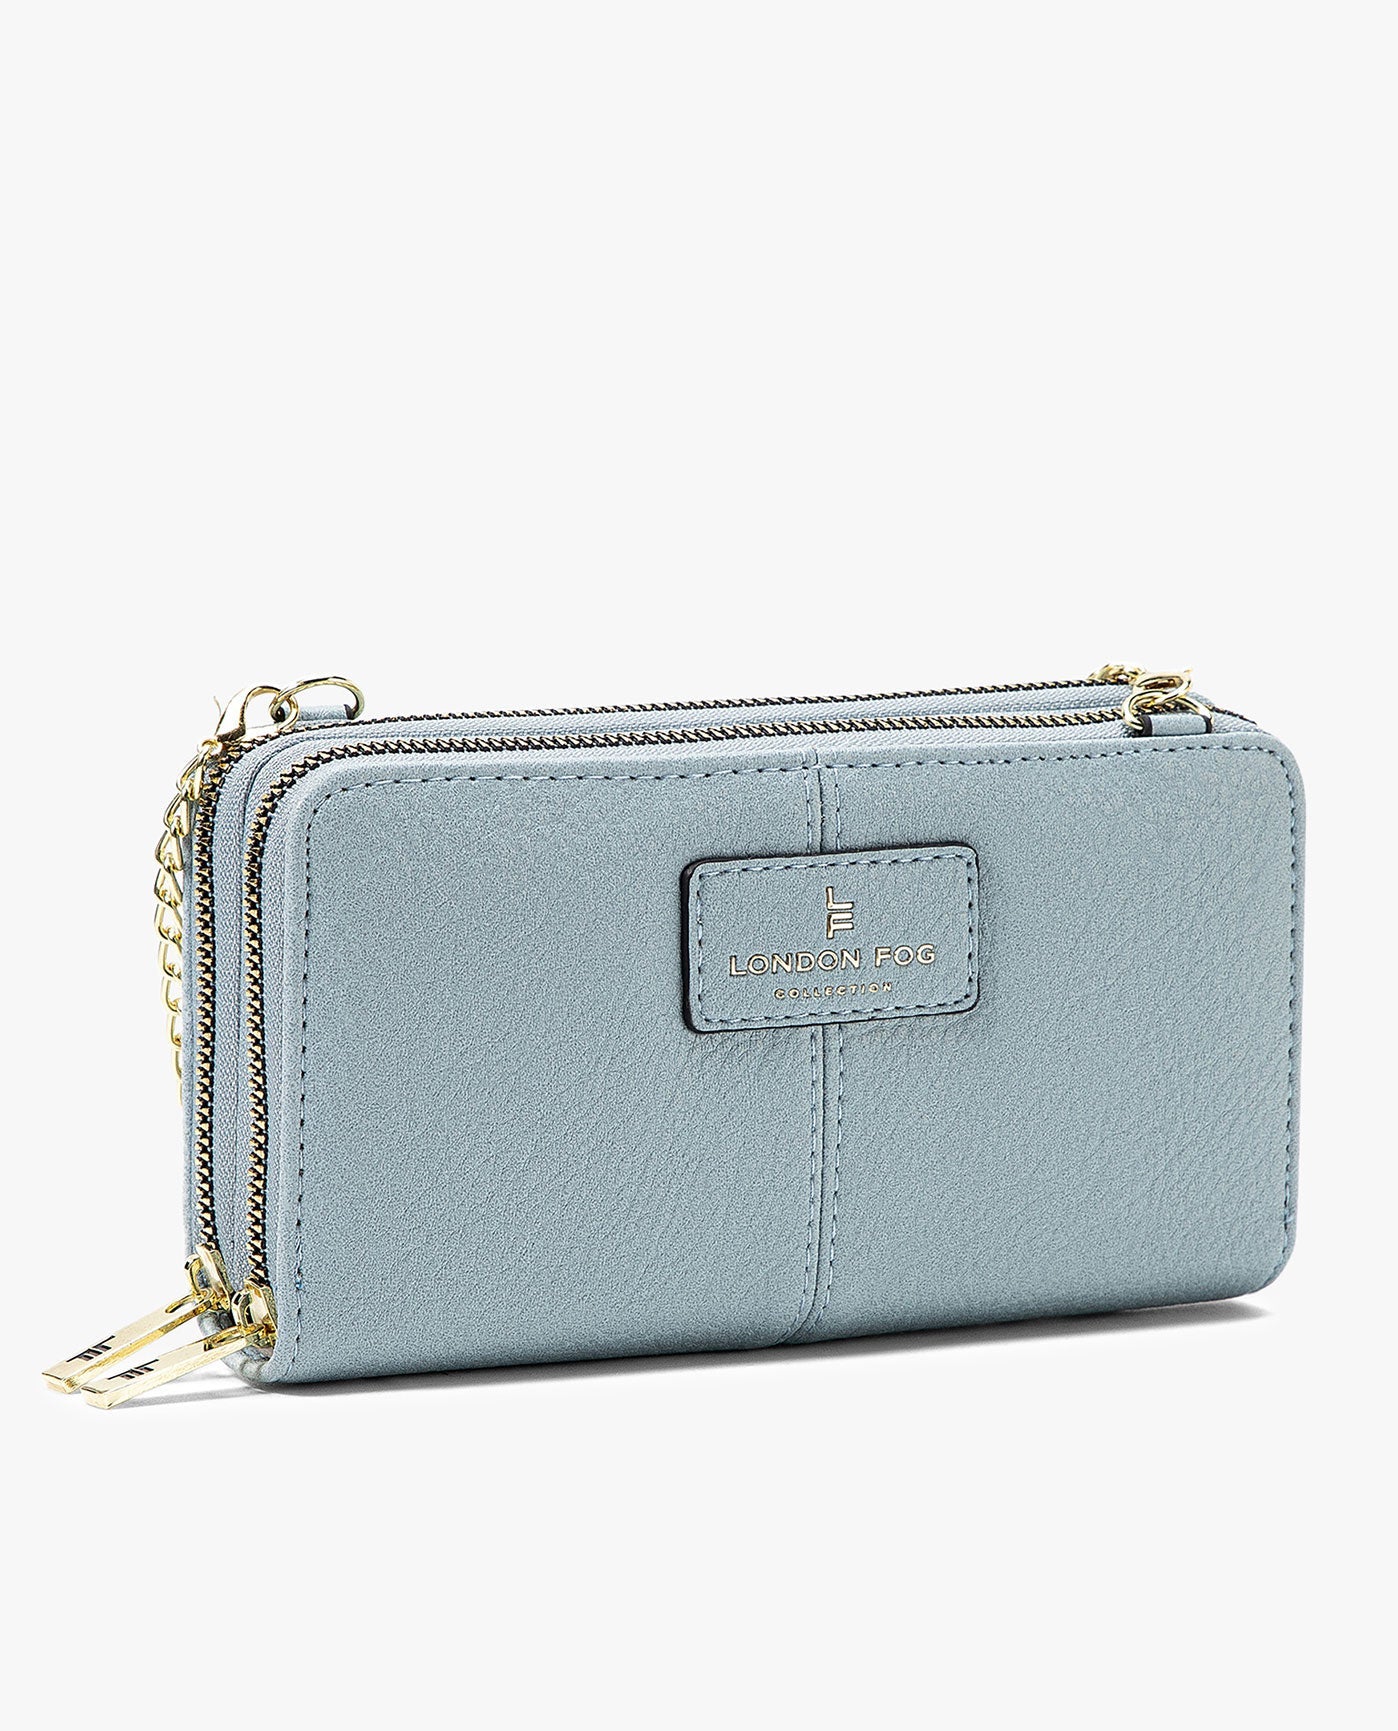 The 13 best crossbody phone bags and cases to shop